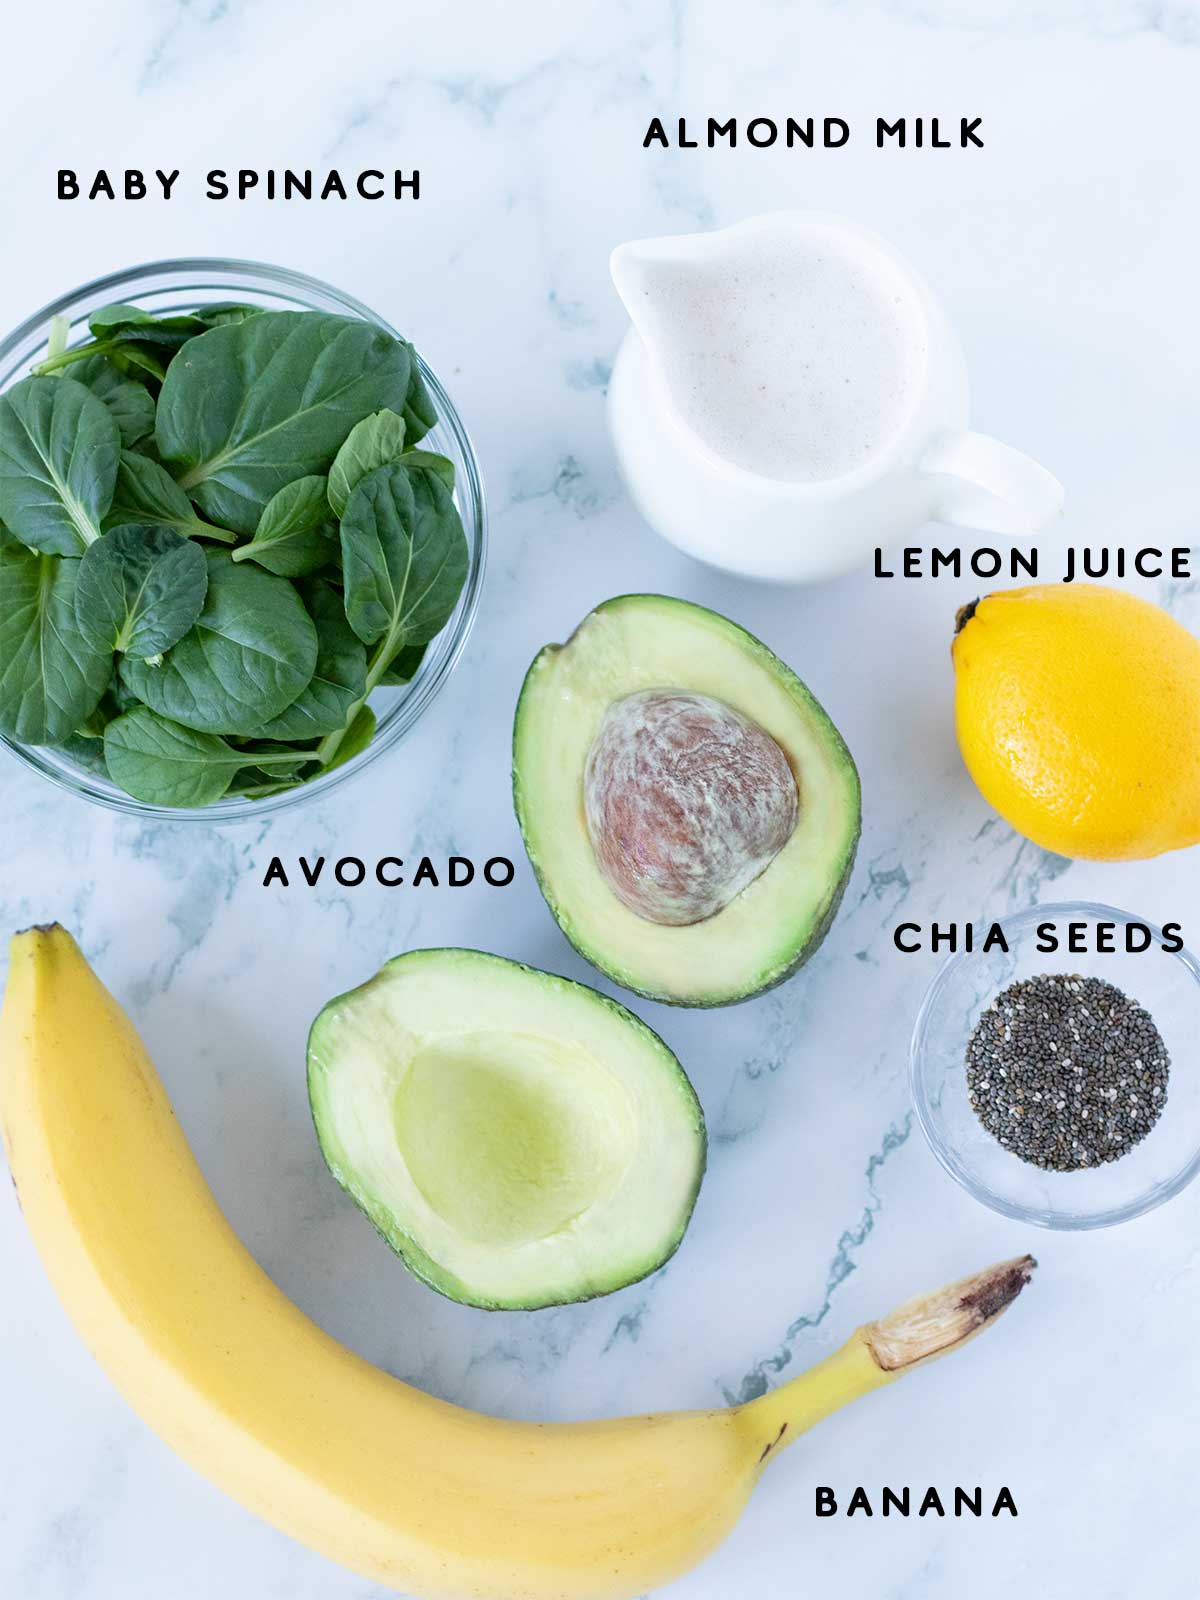 Simple plant-based ingredients for preparing avocado and banana smoothie with spinach